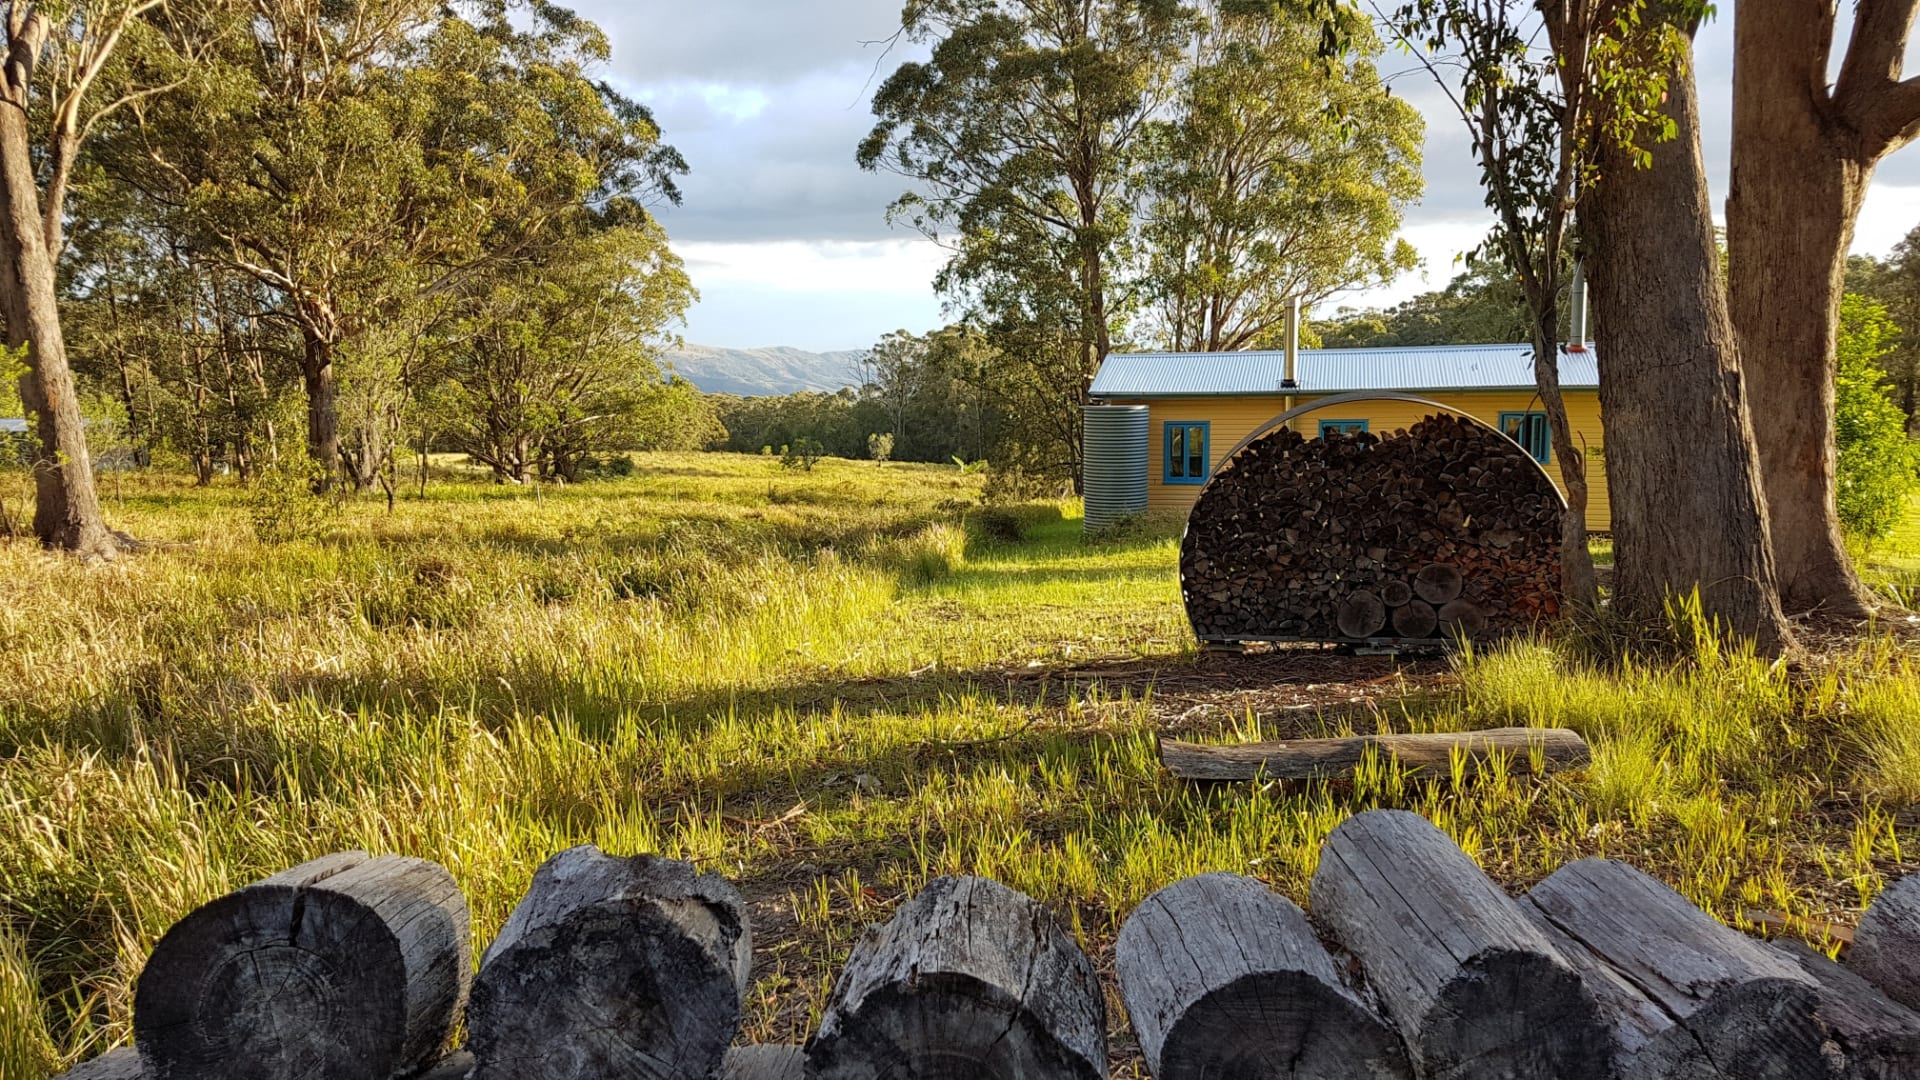 Looking past the woodstacks to the eco-cabin and the Hunter Valley below